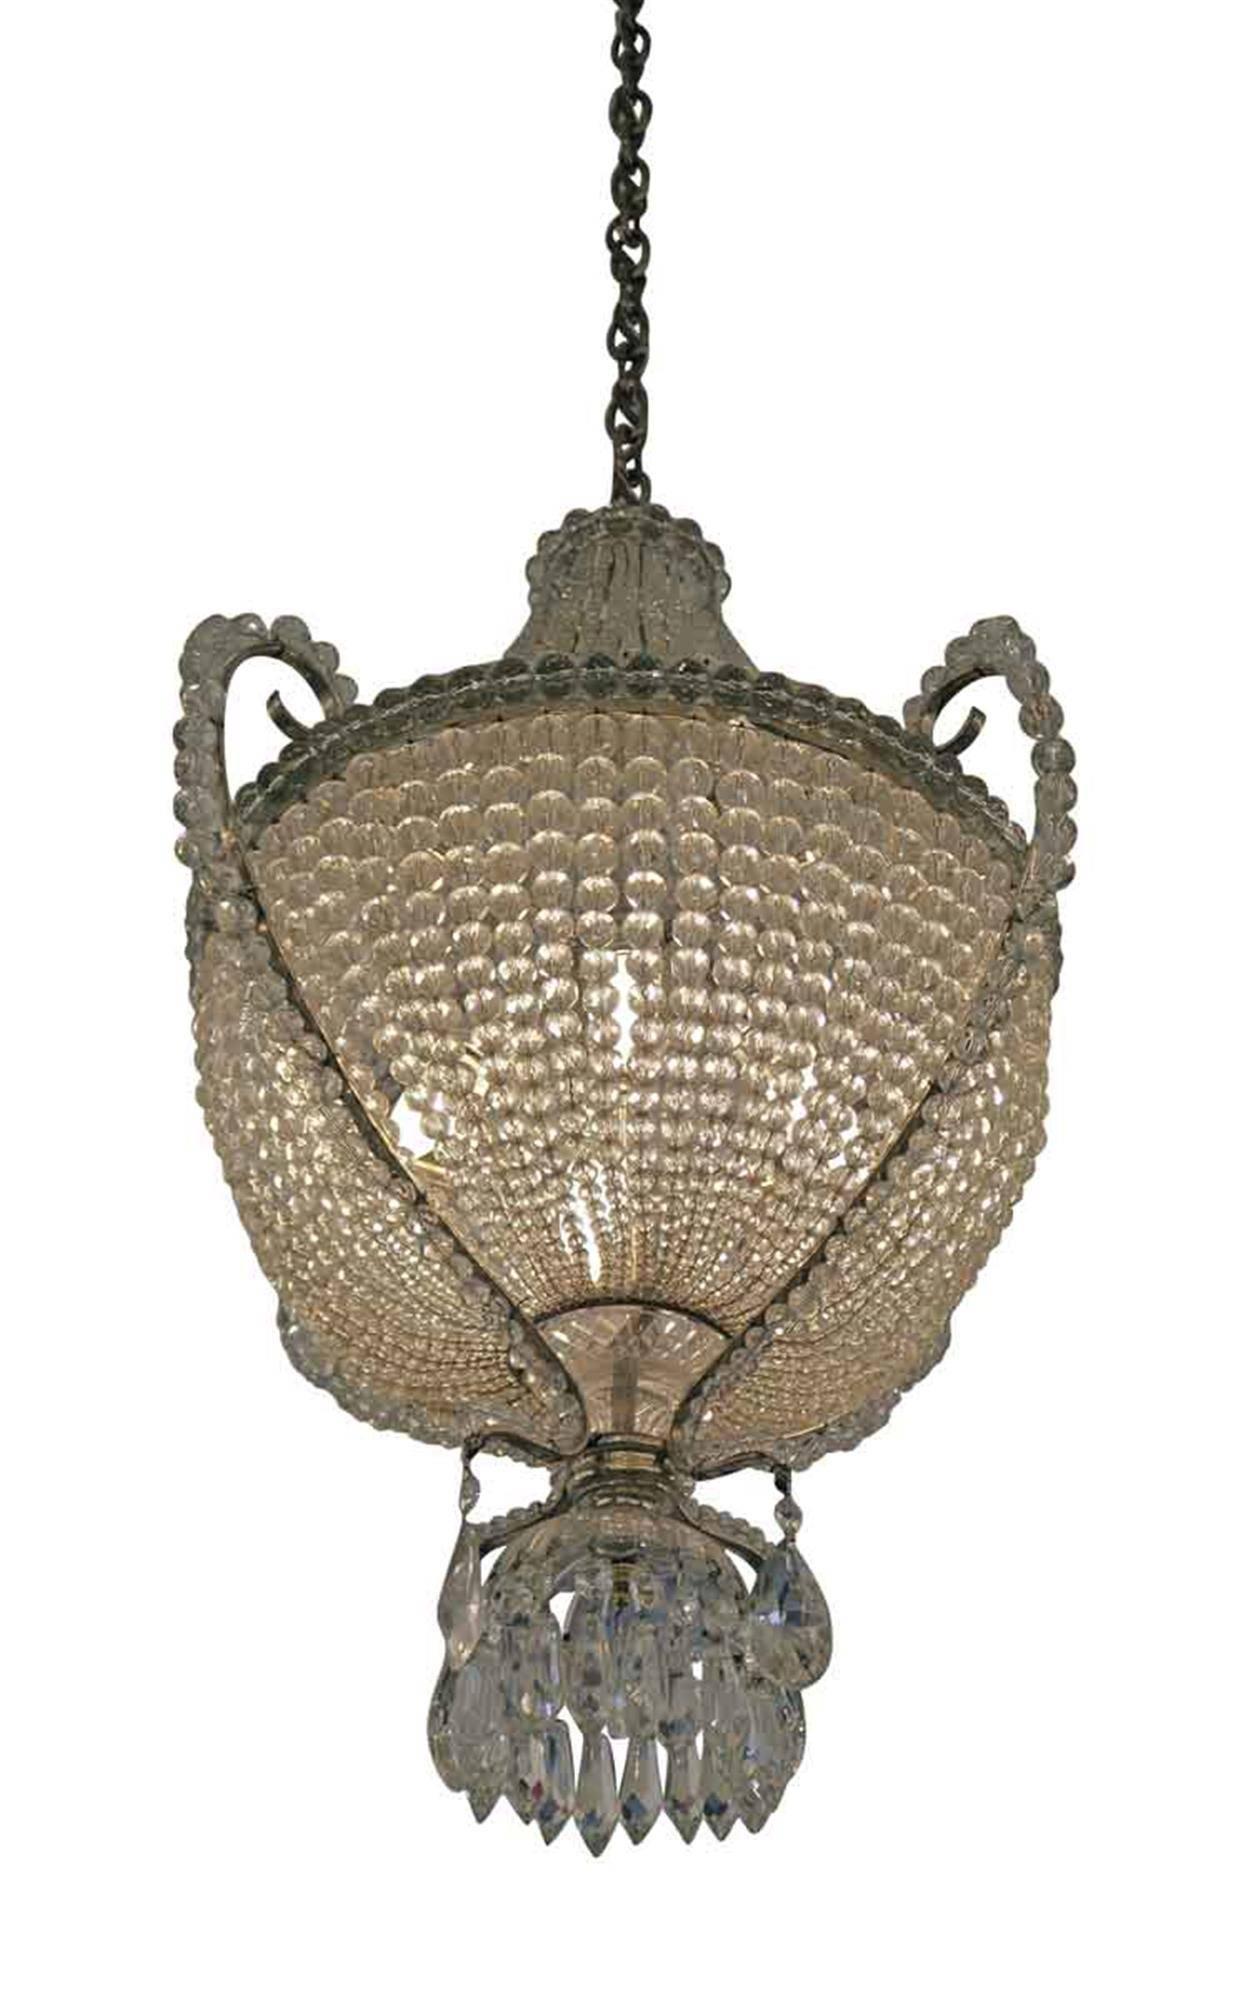 1920s crystal basket chandelier made of beaded crystals. This can be seen at our 302 Bowery location in NoHo in Manhattan.